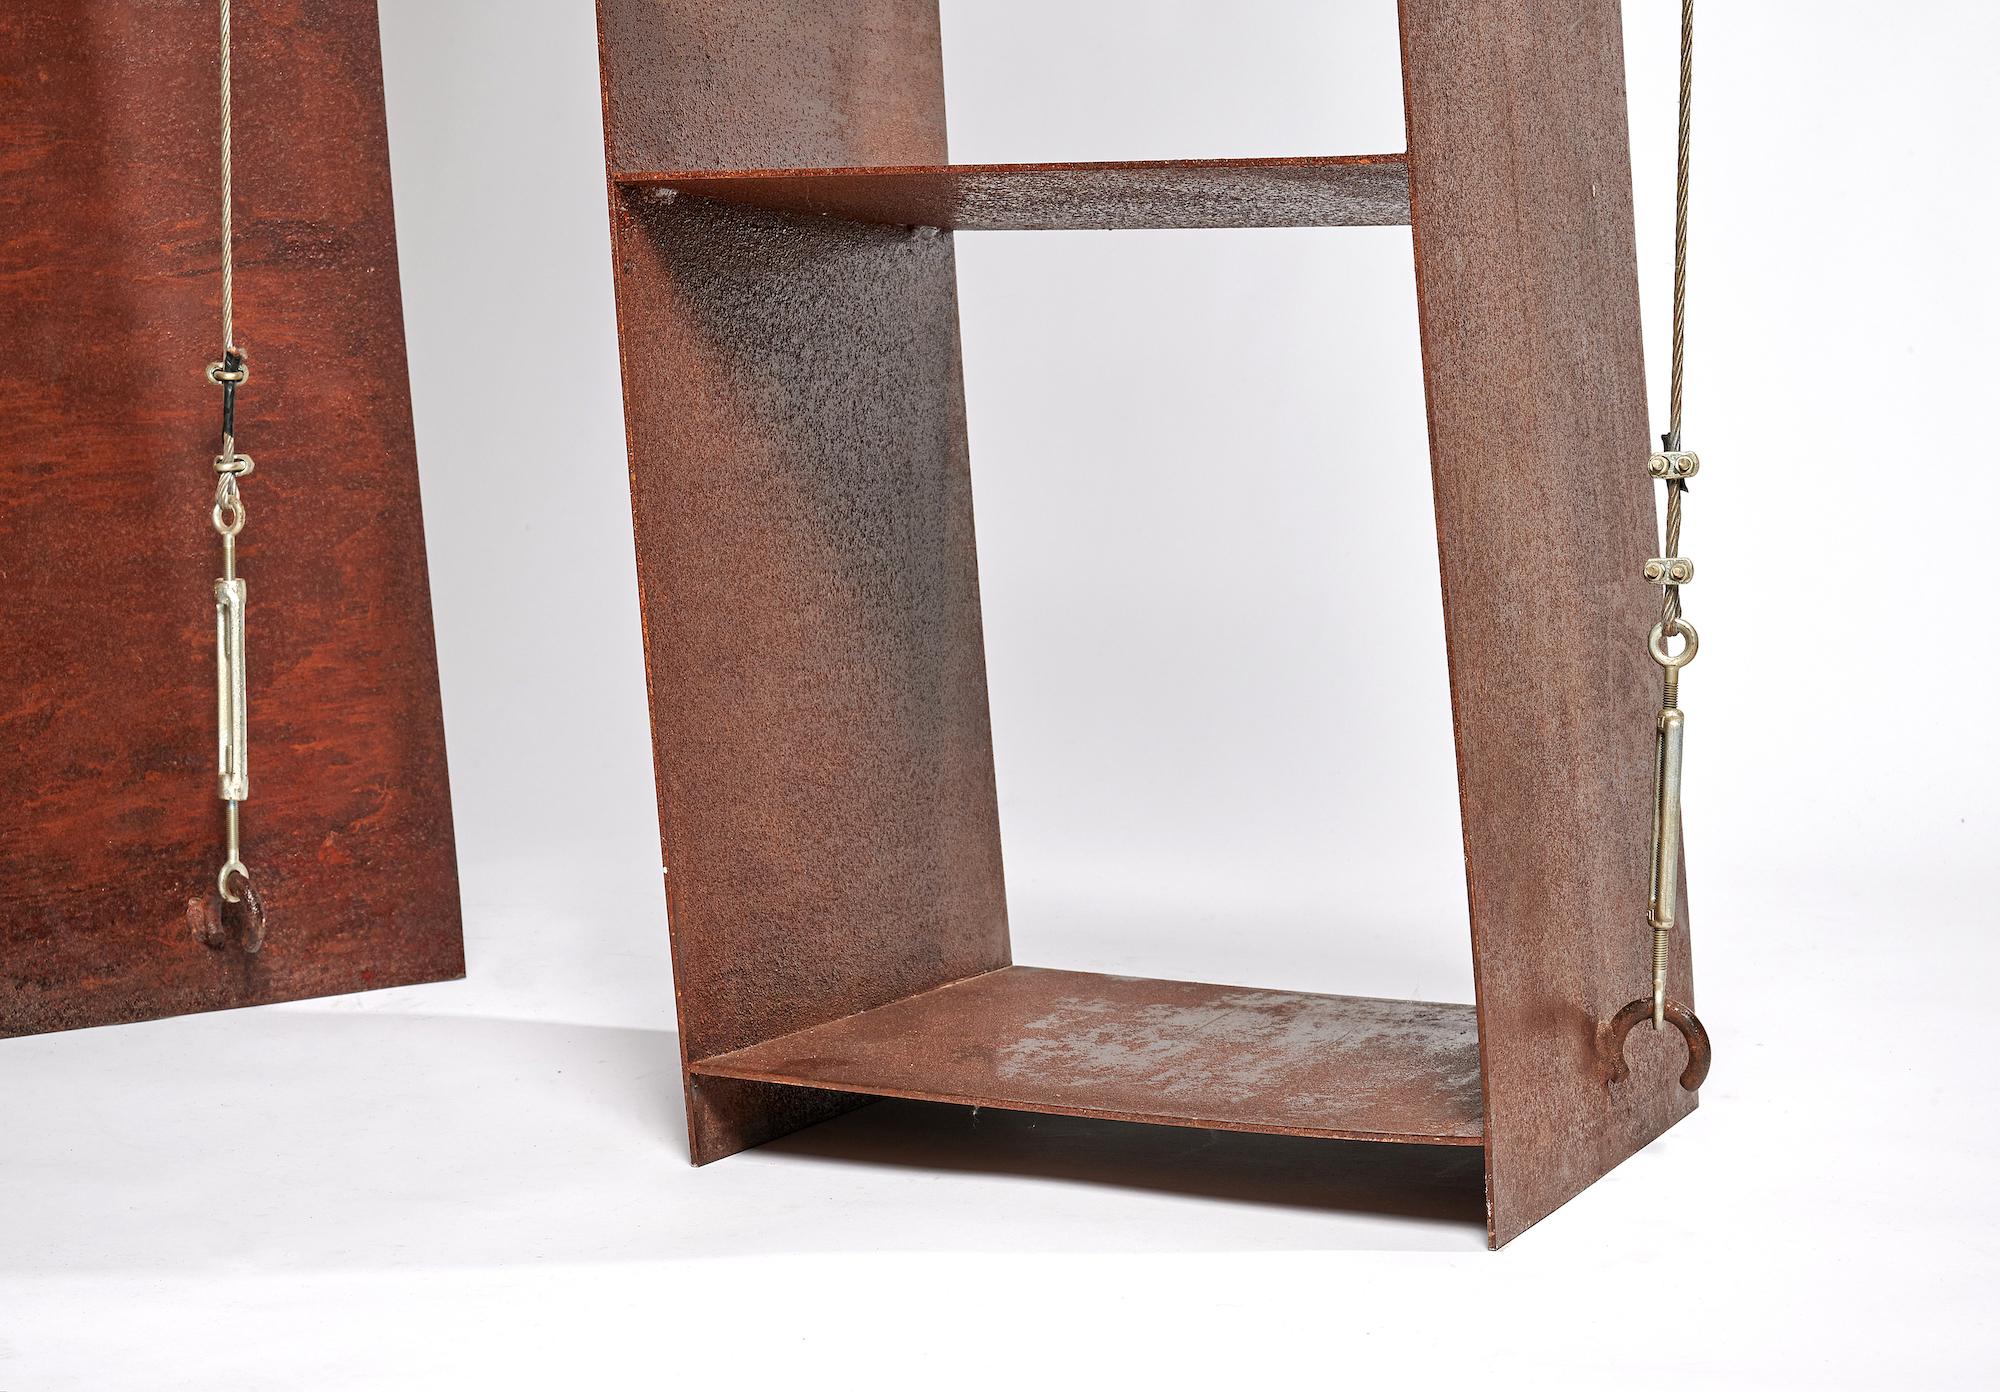 Steel Verspantes Regal bookcase by Wolfgang Laubersheimer for Pentagon, Germany, 1984 For Sale